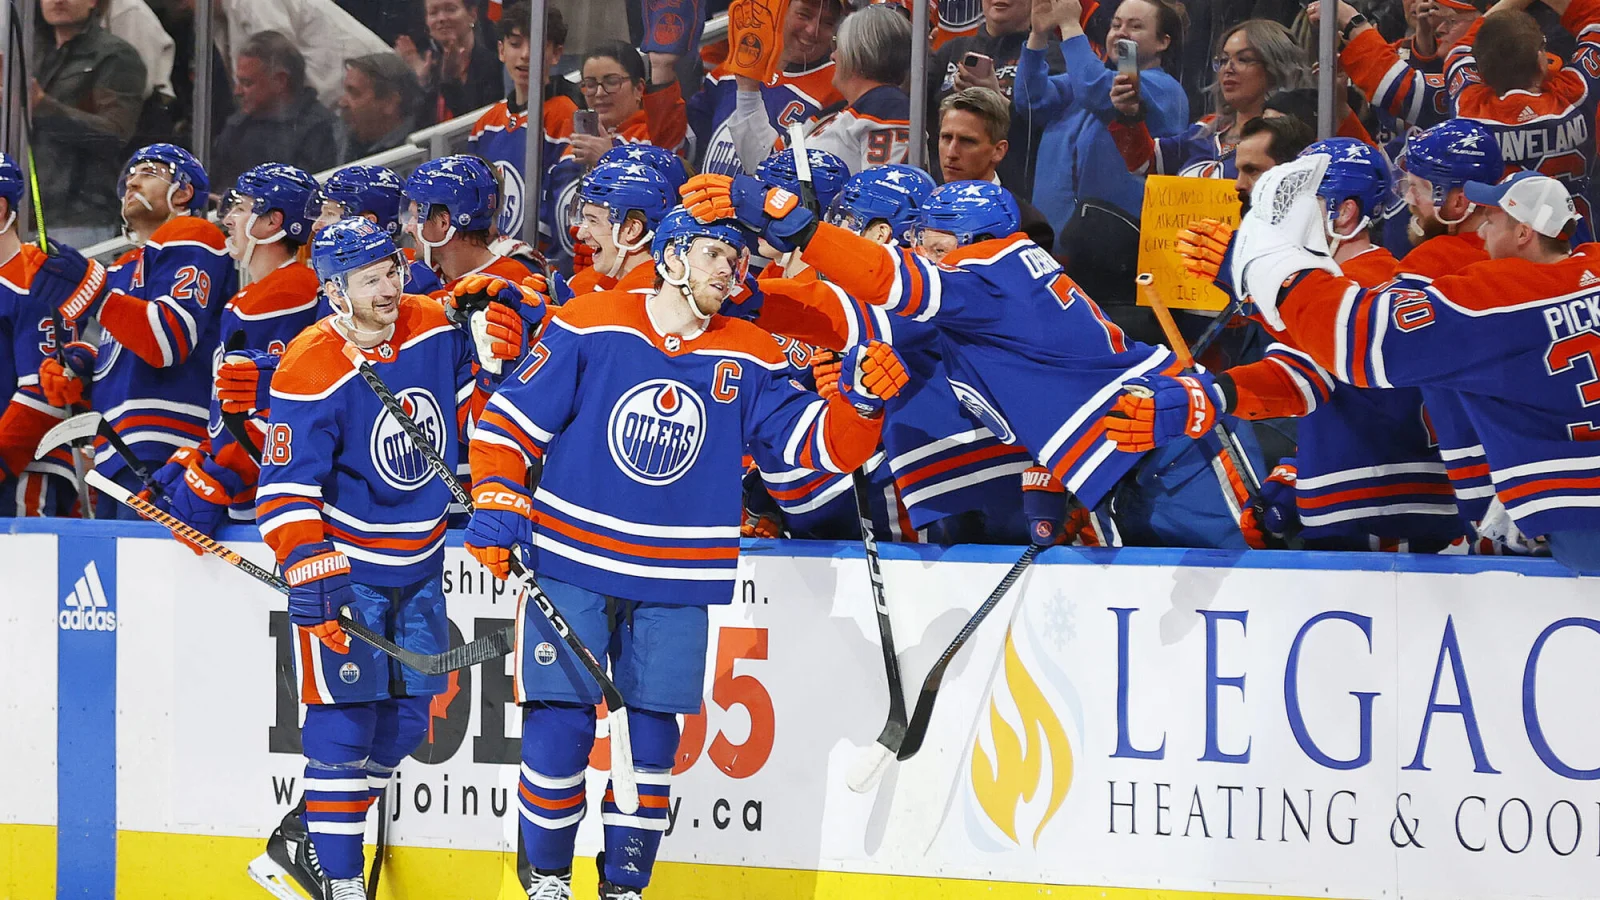 BREAKING NEWS: Joining Exclusive NHL Club After 100 Assists in Season, McDavid